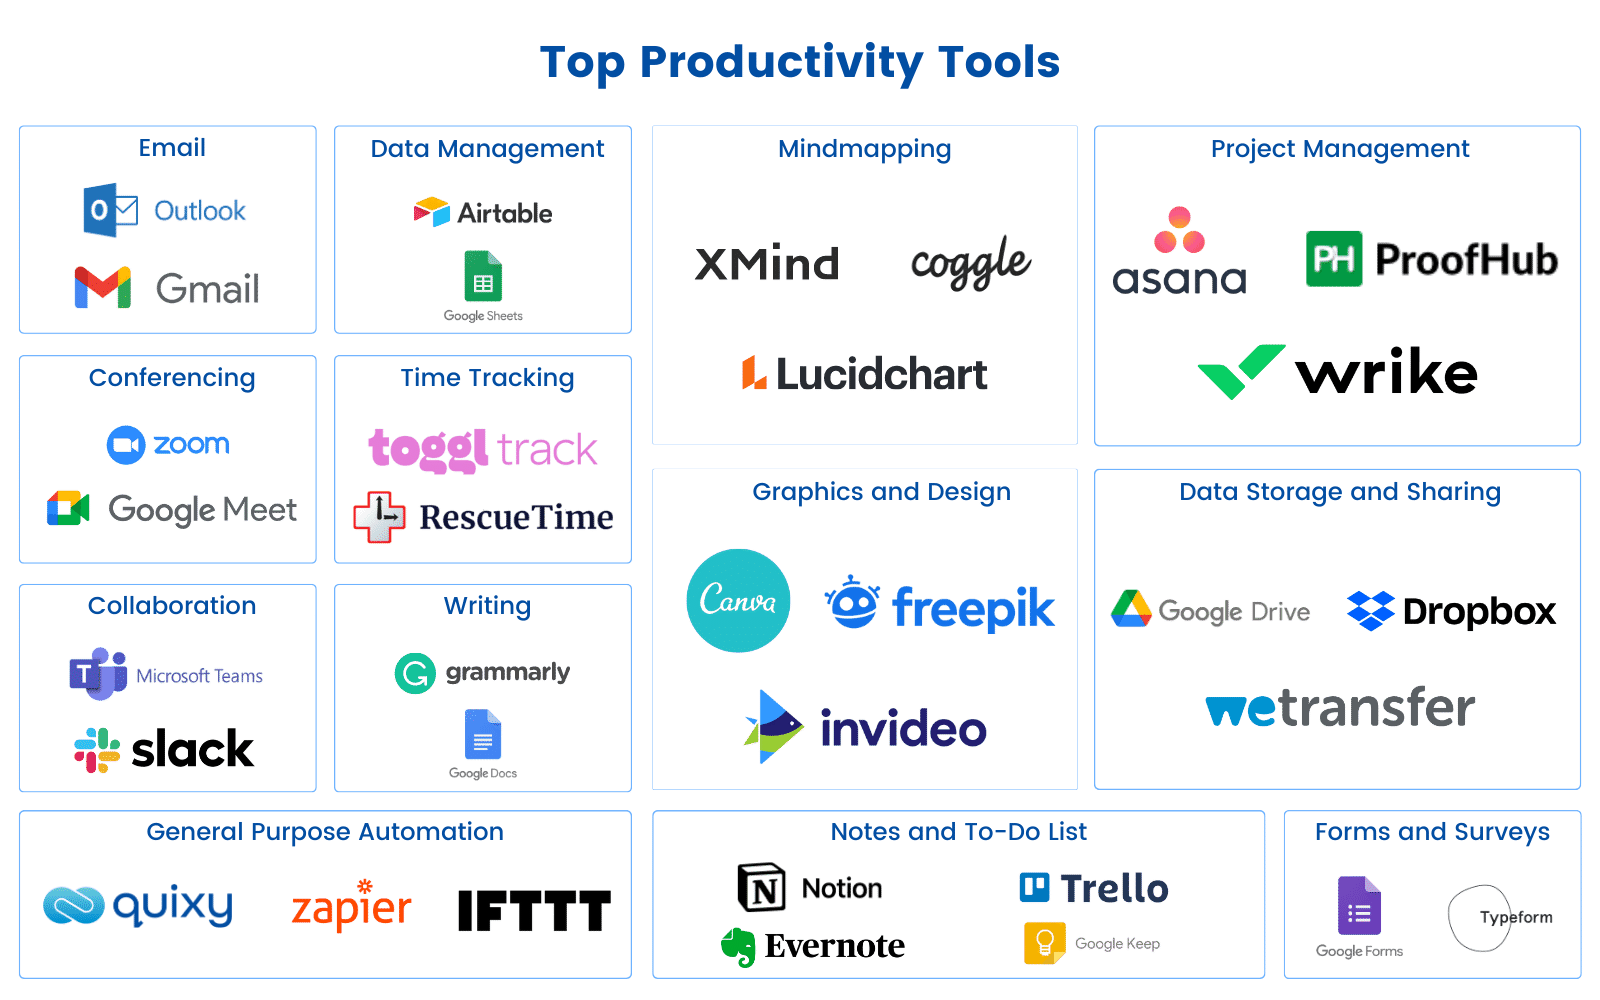 Guide to Finding the Best Productivity Tools for Your Company